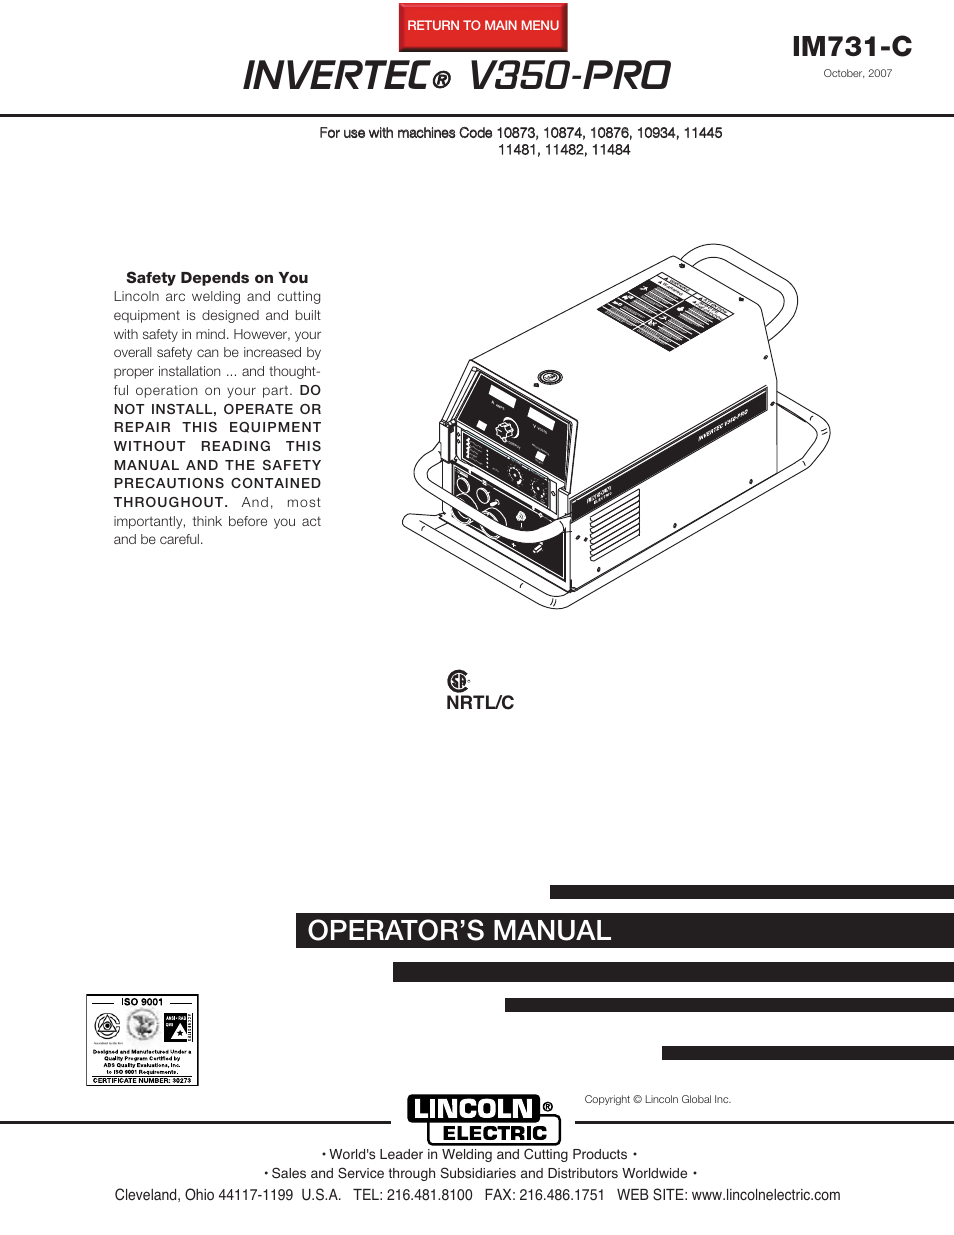 Lincoln Electric INVERTEC V350-PRO User Manual | 40 pages